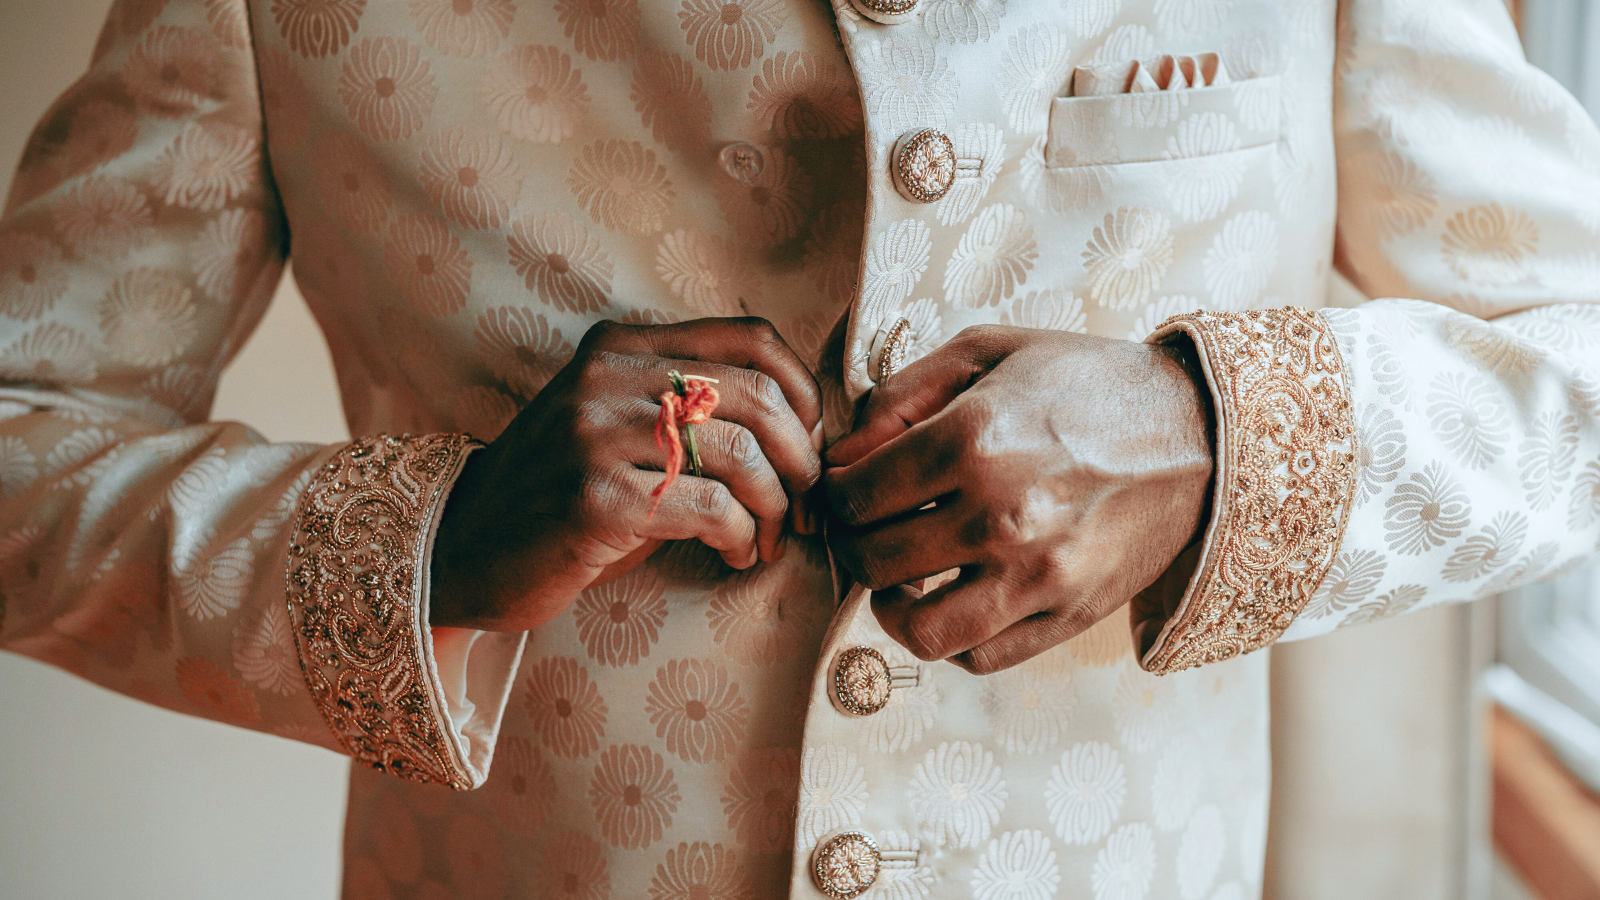 What is best to wear at an engagement ceremony? - Quora